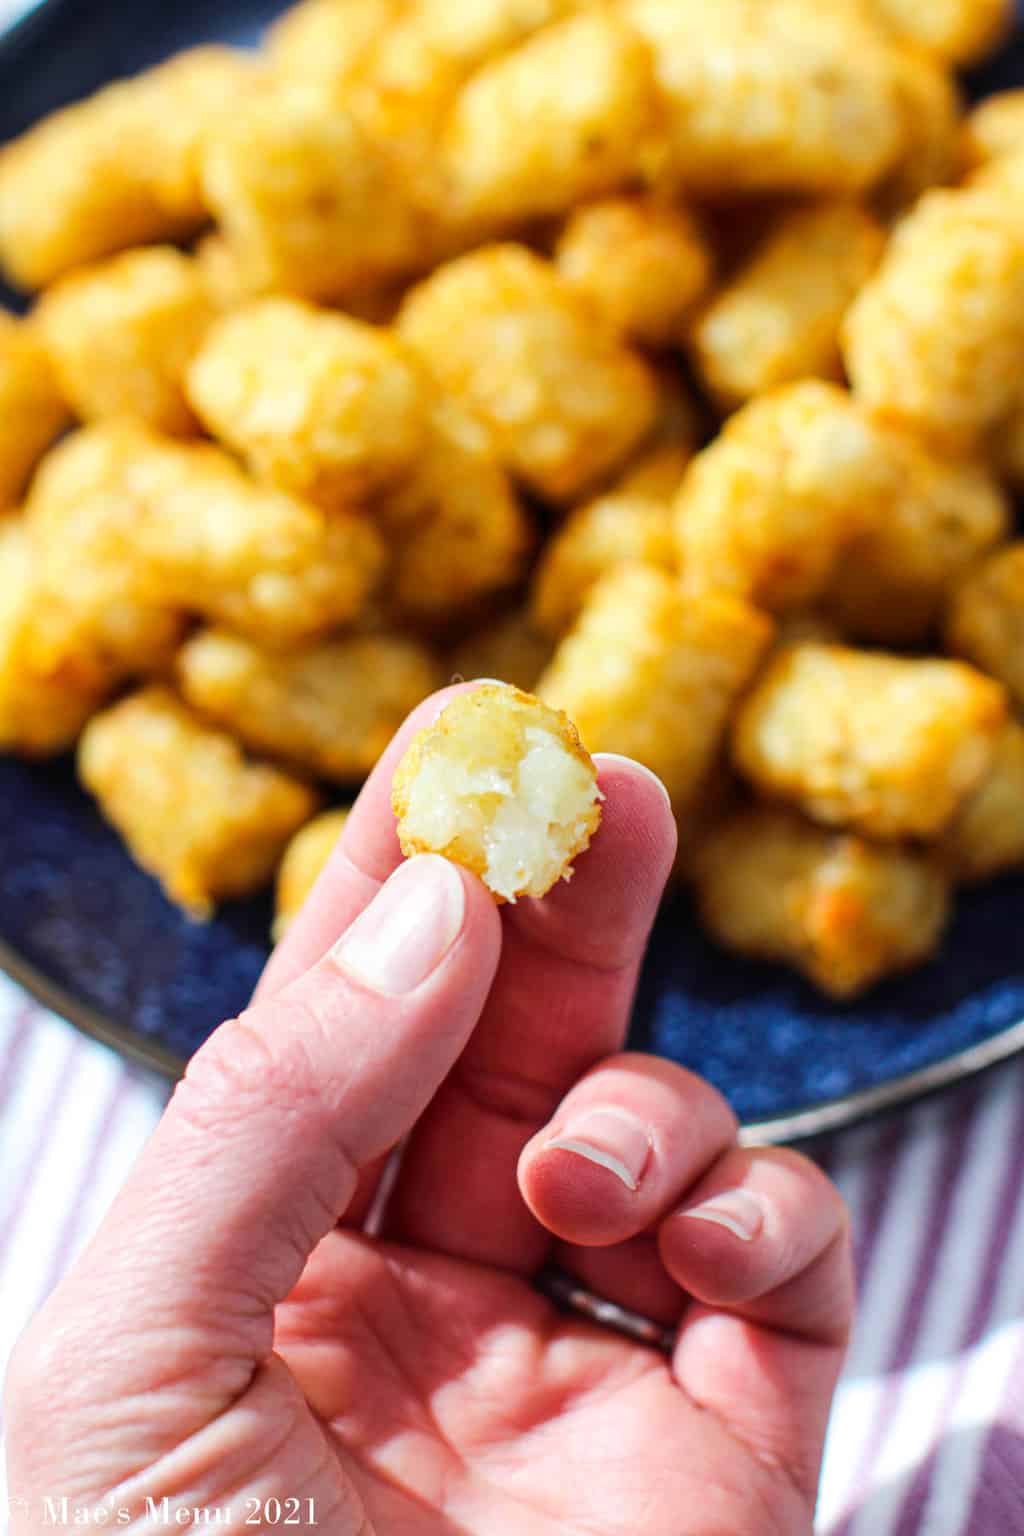 A hand holding a tater tot that's bit in half